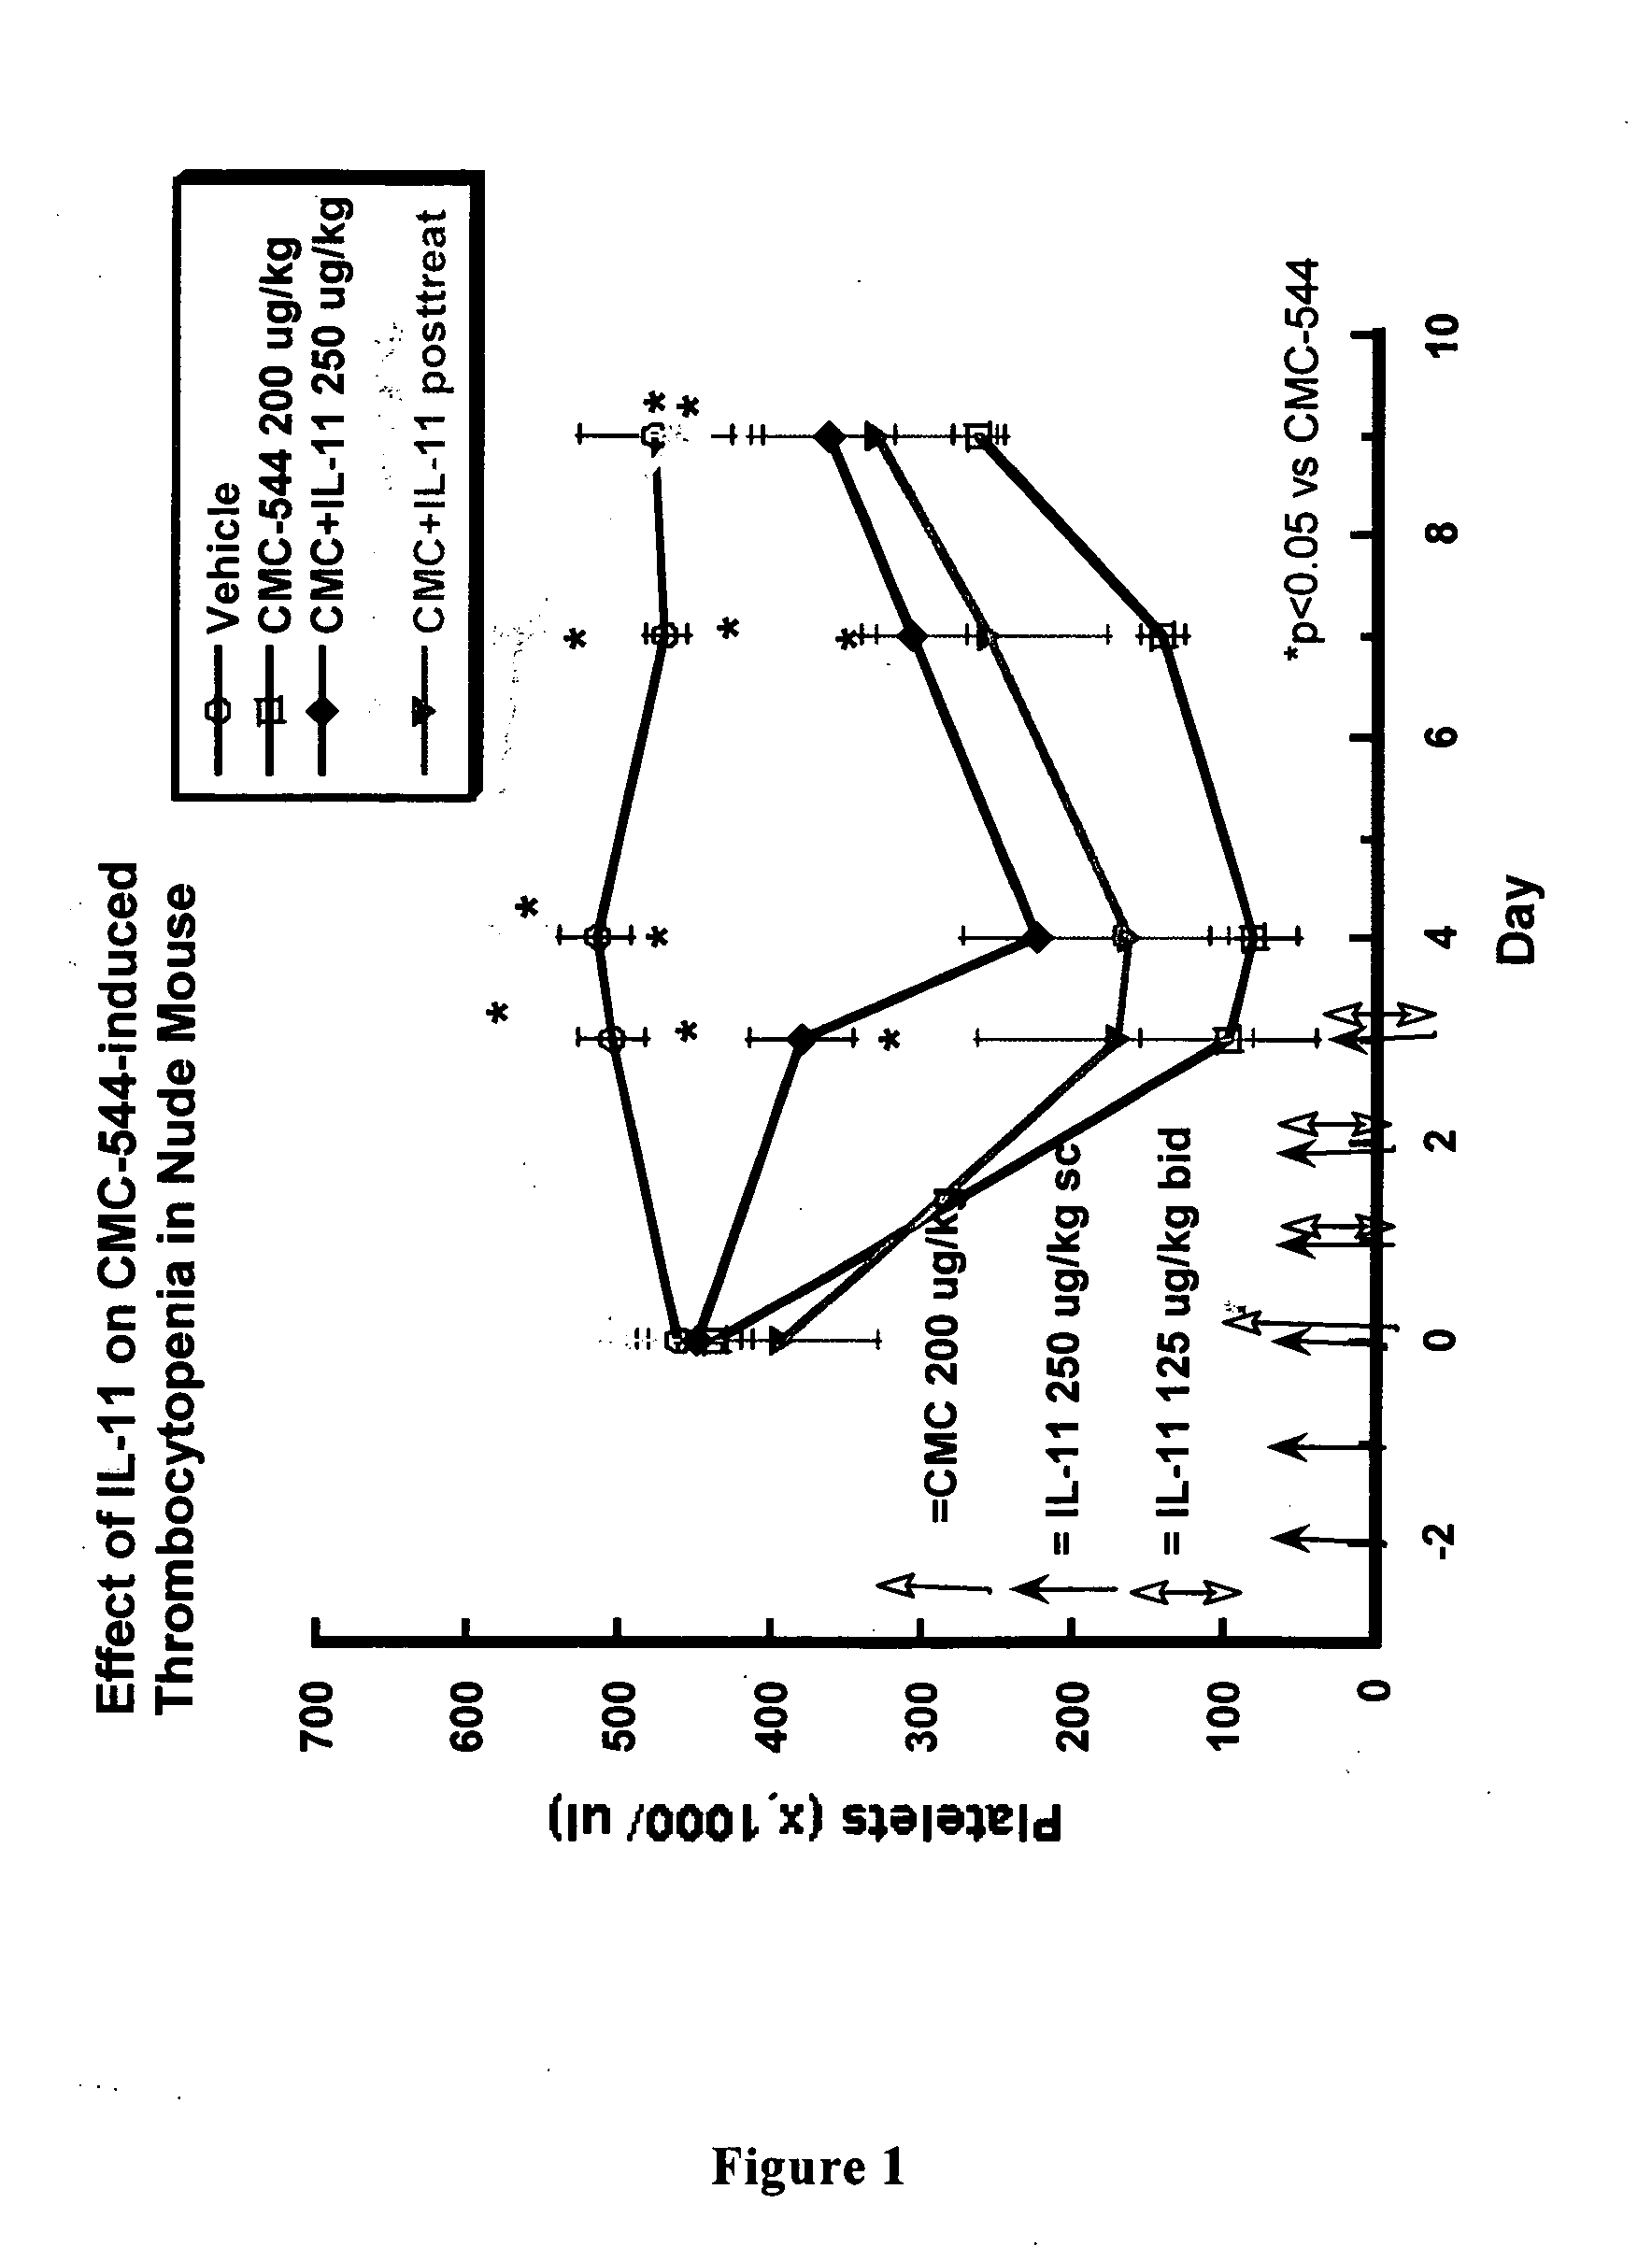 Interleukin-11 compositions and methods of use